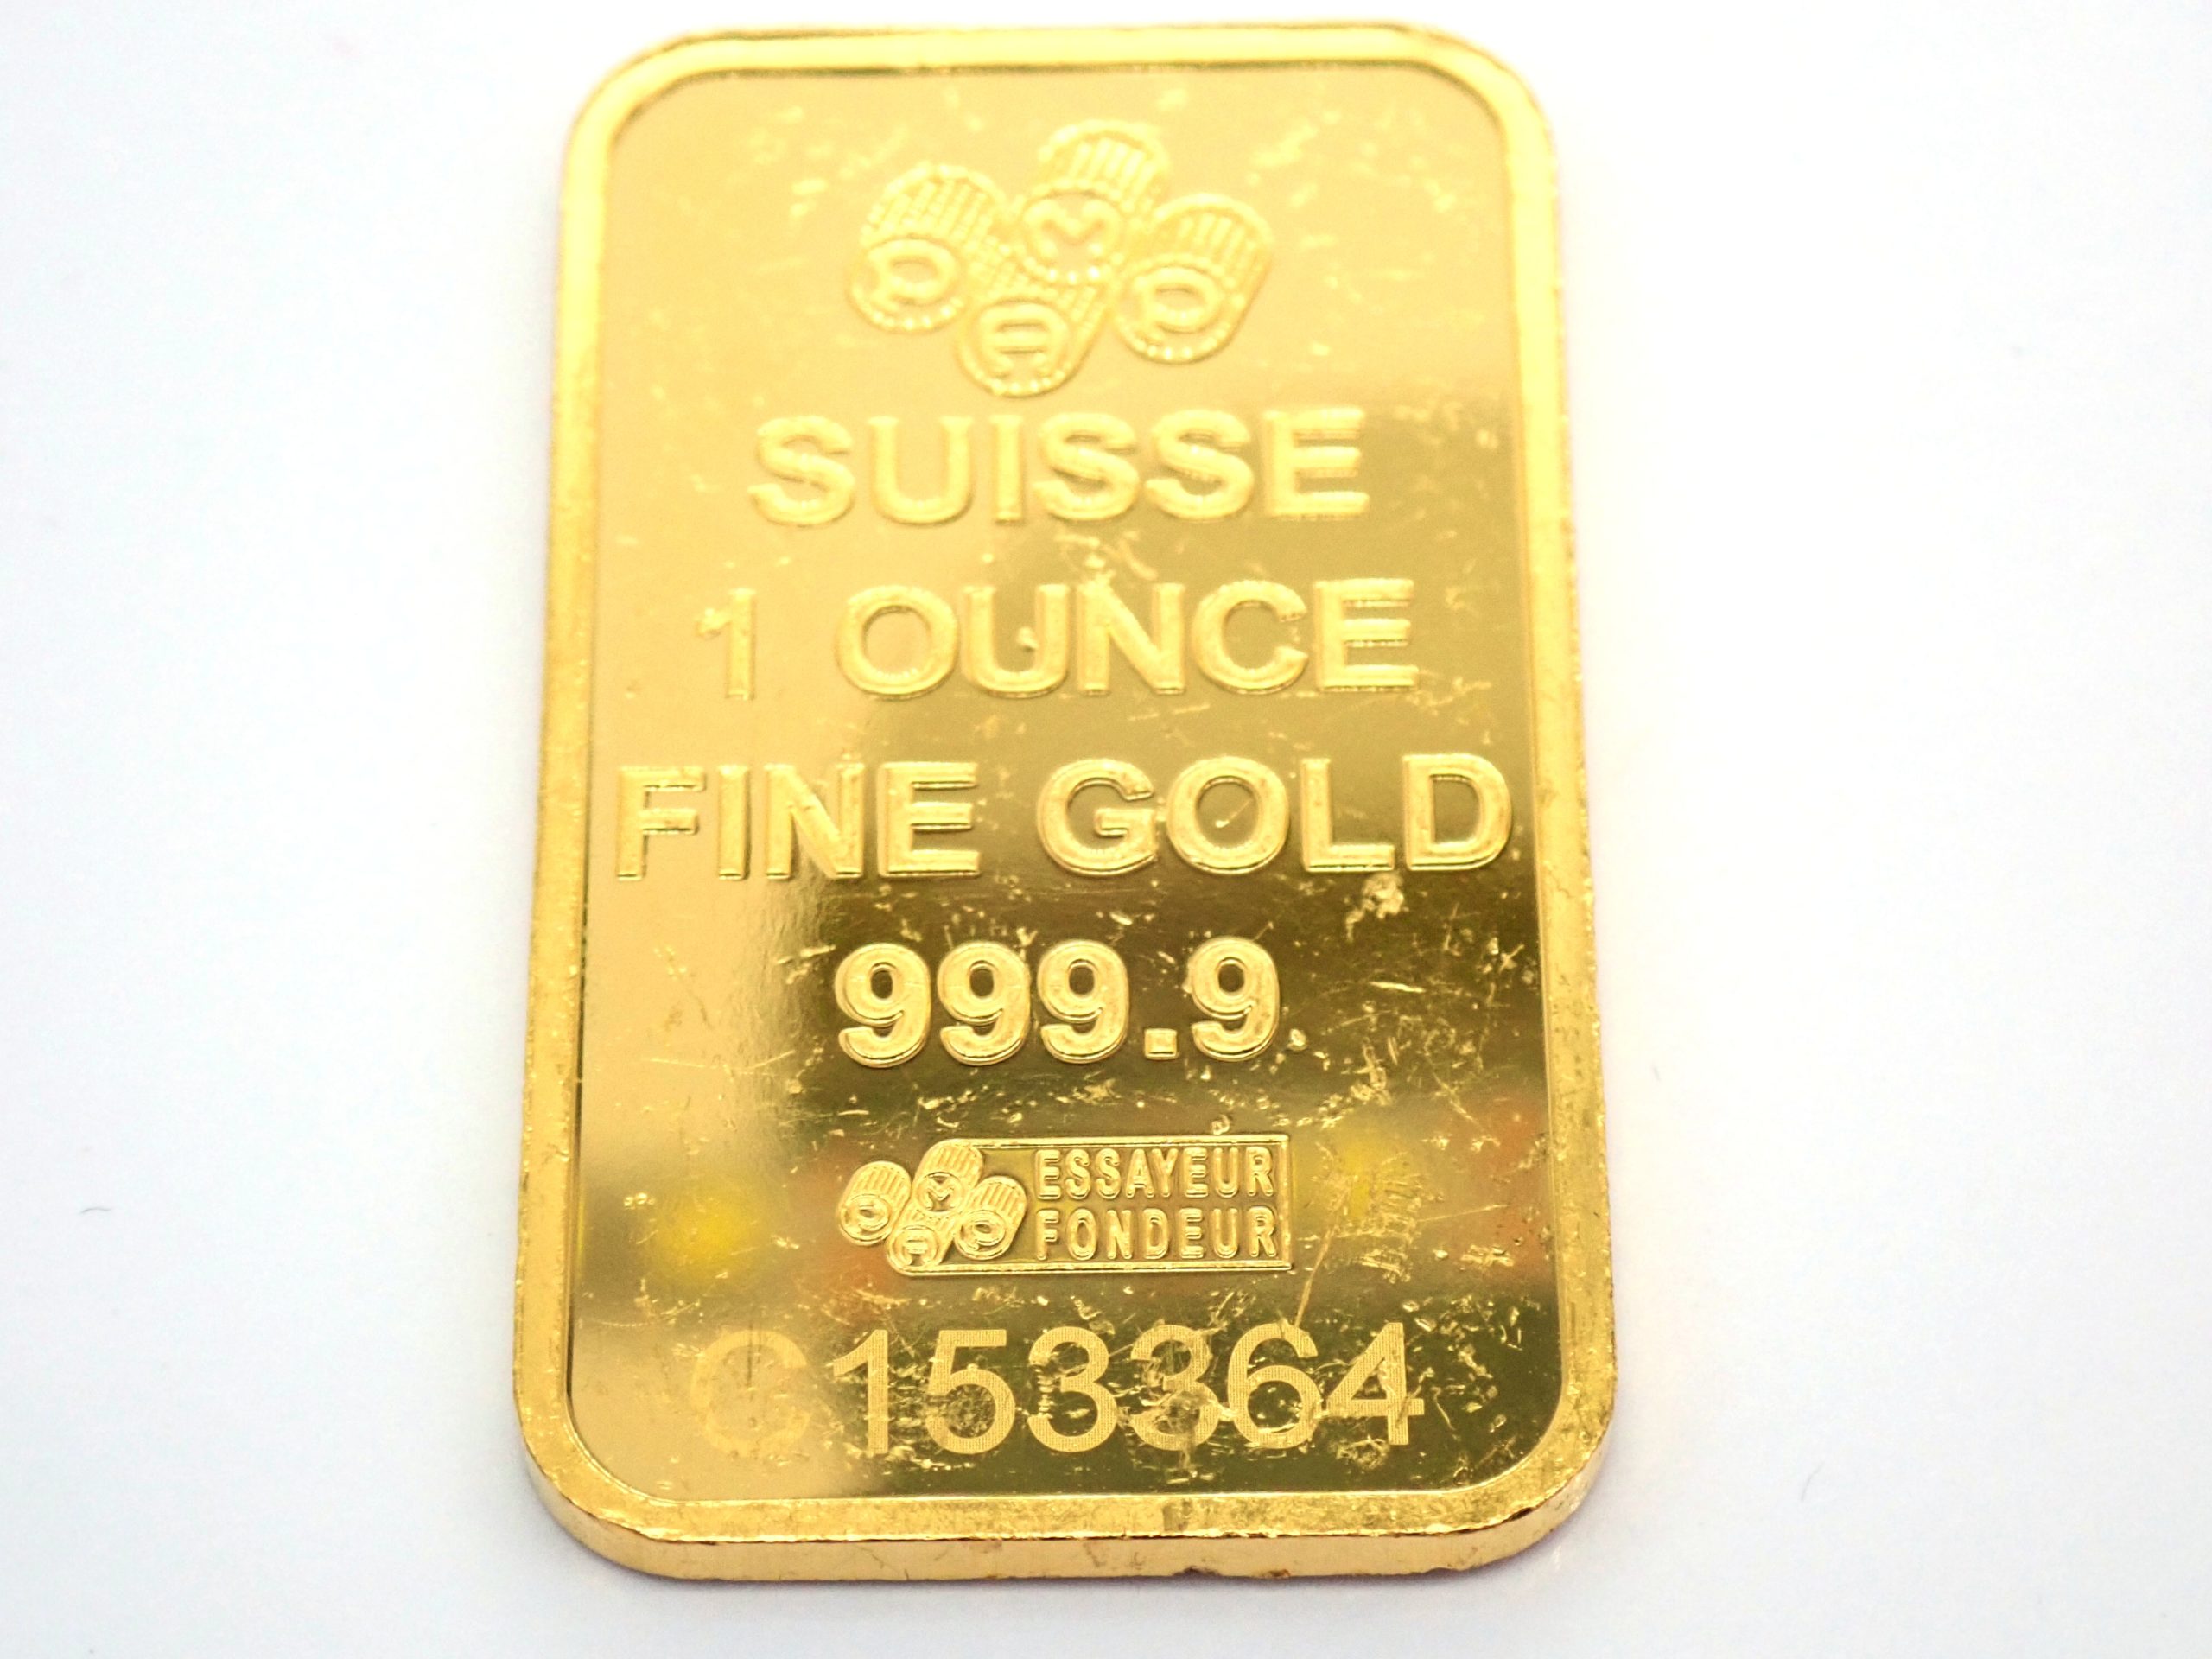 Чистое золото 999. Suisse 10g Fine Gold 999.9 кулон. One Troy Ounce Fine Gold 999.9. One Troy Ounce Fine Gold 999.9 круглая. UBS 20g Gold 999.9.